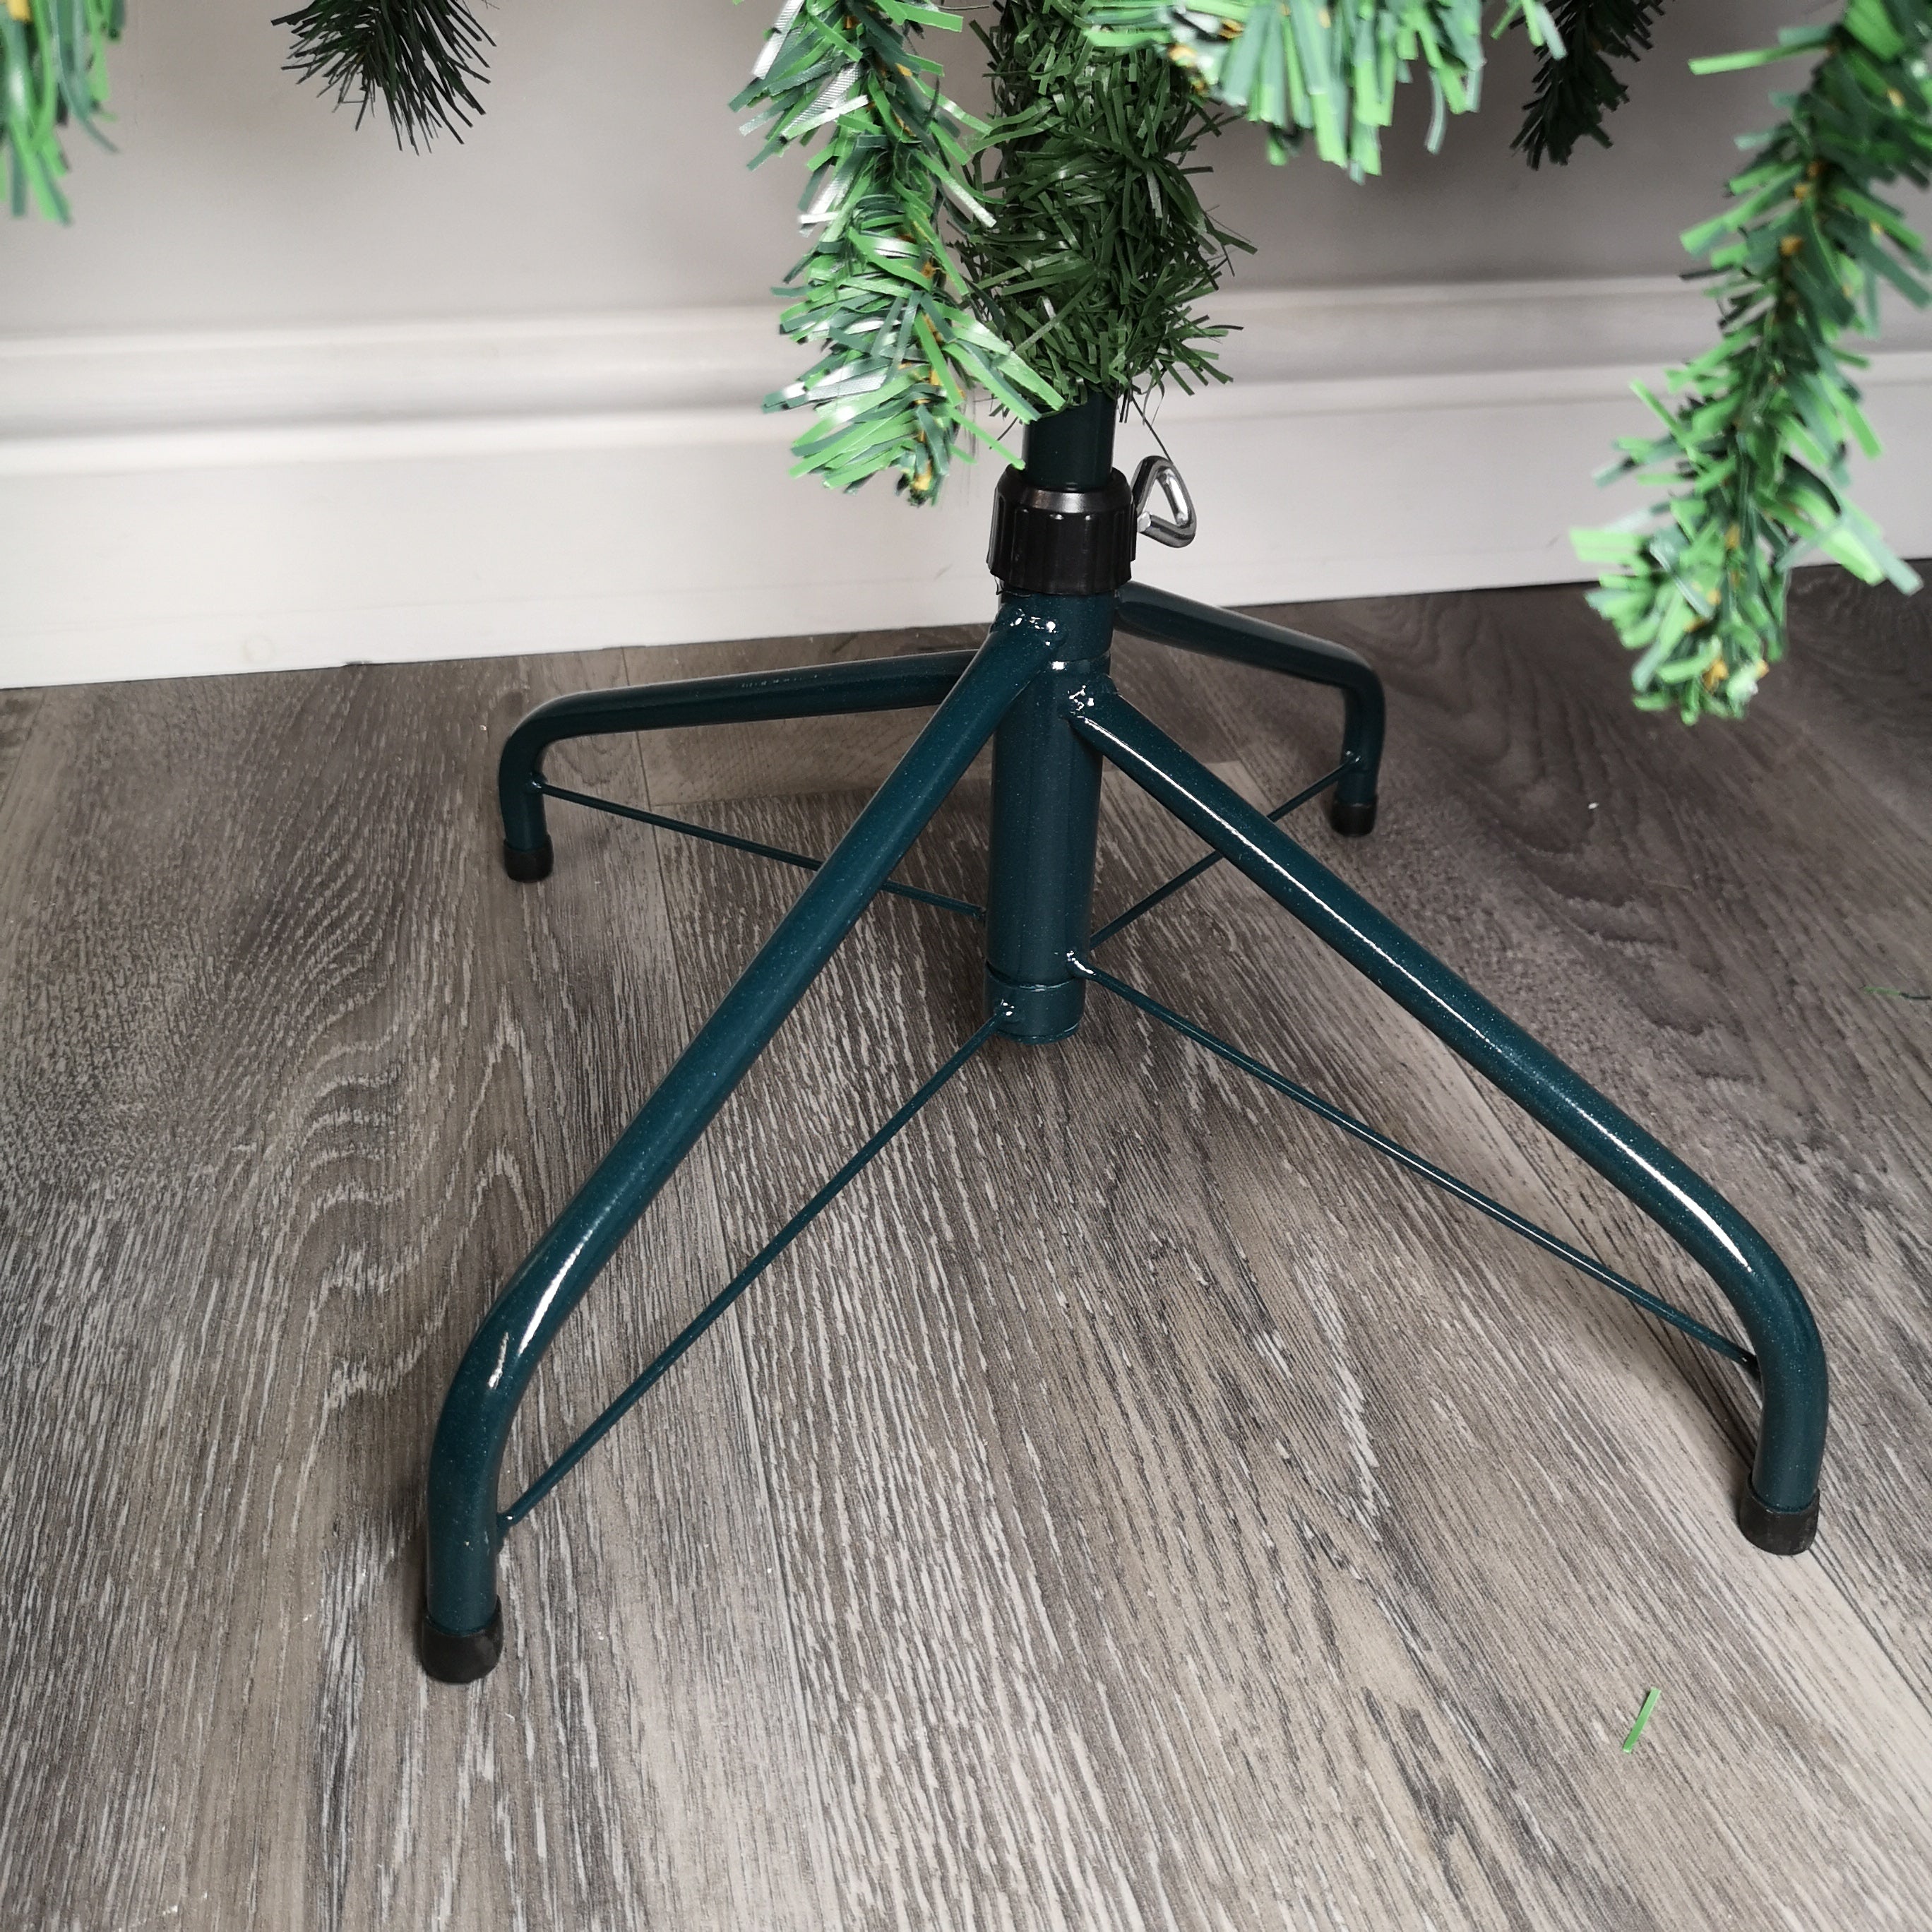 2m (6.5ft) Premier Plain Green Pencil Style PVC Spruce Pine Slim Christmas Tree with Stand